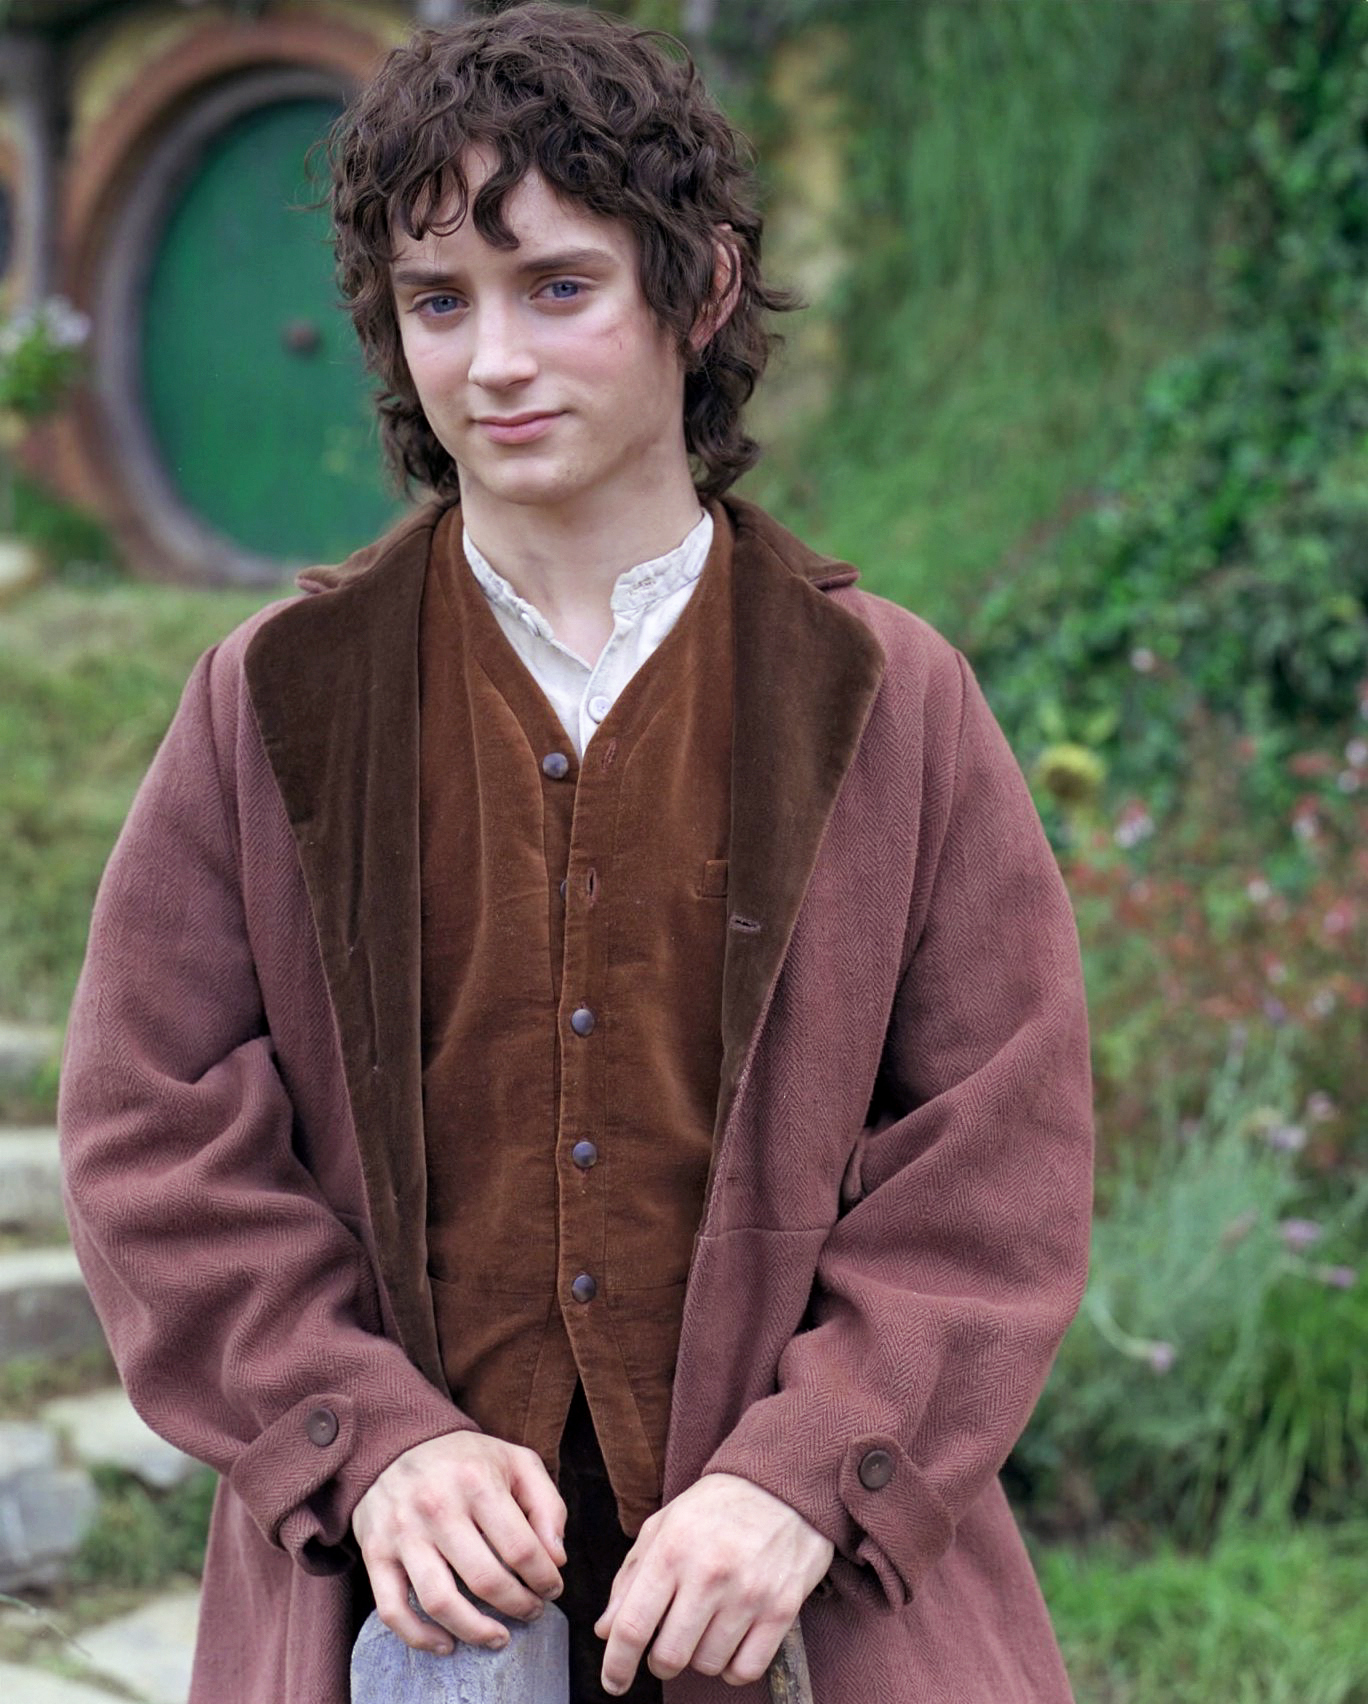 Elijah Wood filming The Lord of the Rings: The Fellowship of the Ring.